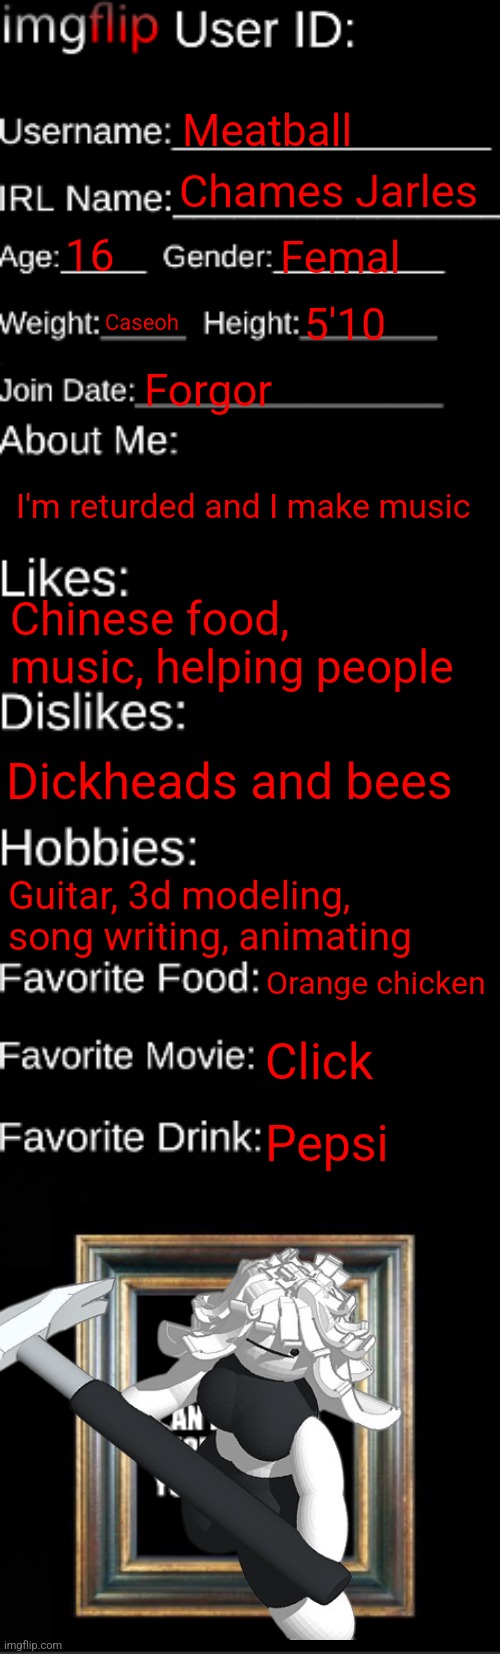 imgflip ID Card | Meatball; Chames Jarles; 16; Femal; Caseoh; 5'10; Forgor; I'm returded and I make music; Chinese food, music, helping people; Dickheads and bees; Guitar, 3d modeling, song writing, animating; Orange chicken; Click; Pepsi | image tagged in imgflip id card | made w/ Imgflip meme maker